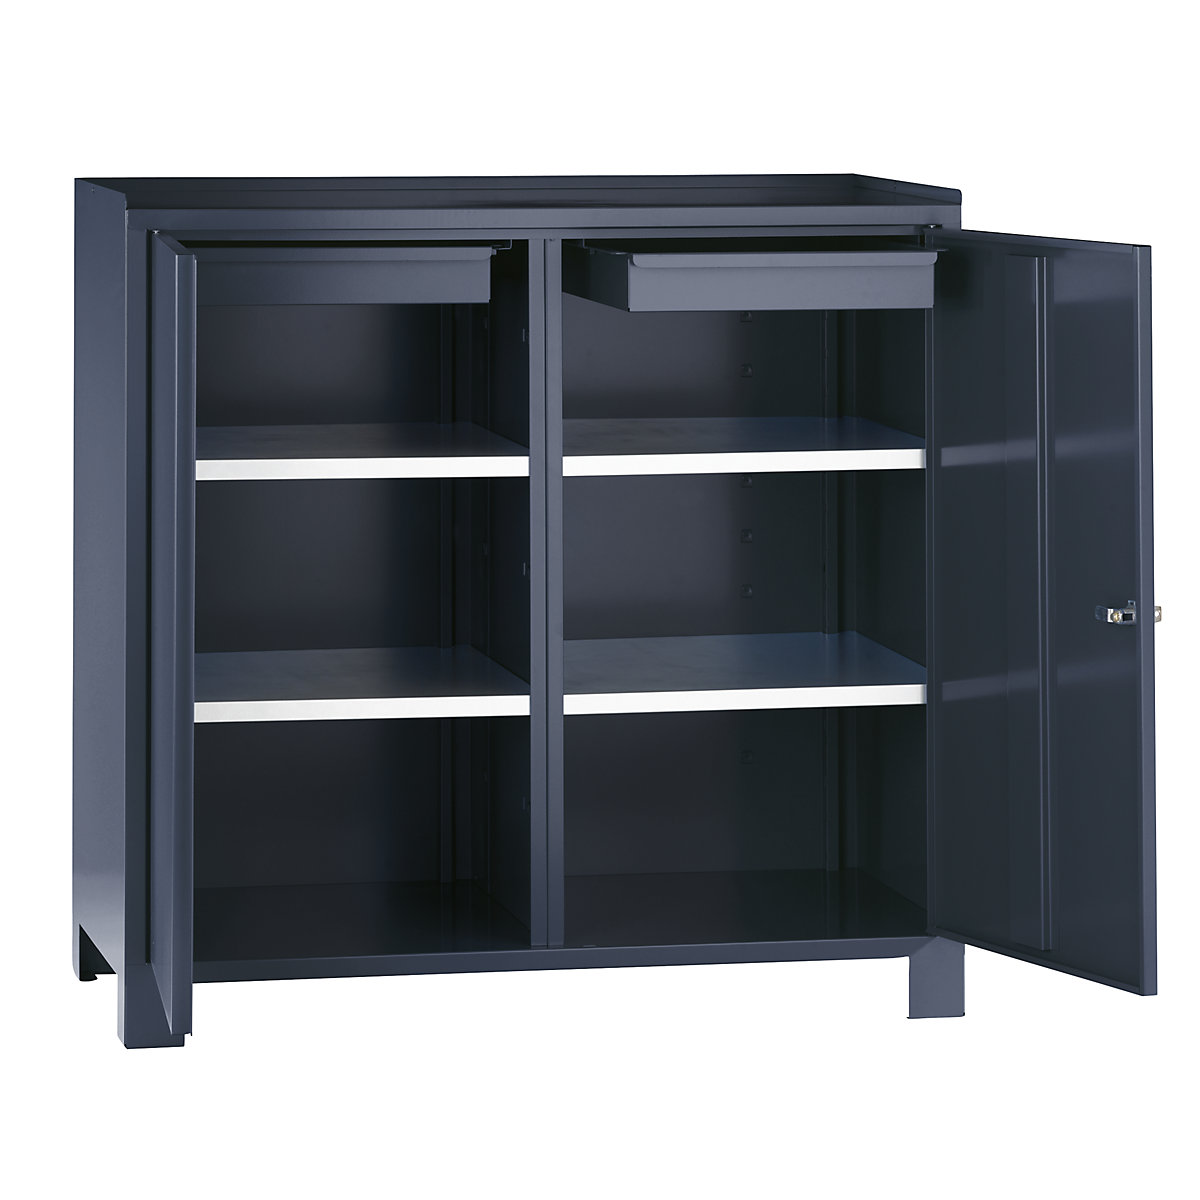 Tool cupboard with feet – Wolf, HxWxD 1000 x 1000 x 500 mm, partition, 1 drawer and 2 shelves on each side, charcoal RAL 7016-10